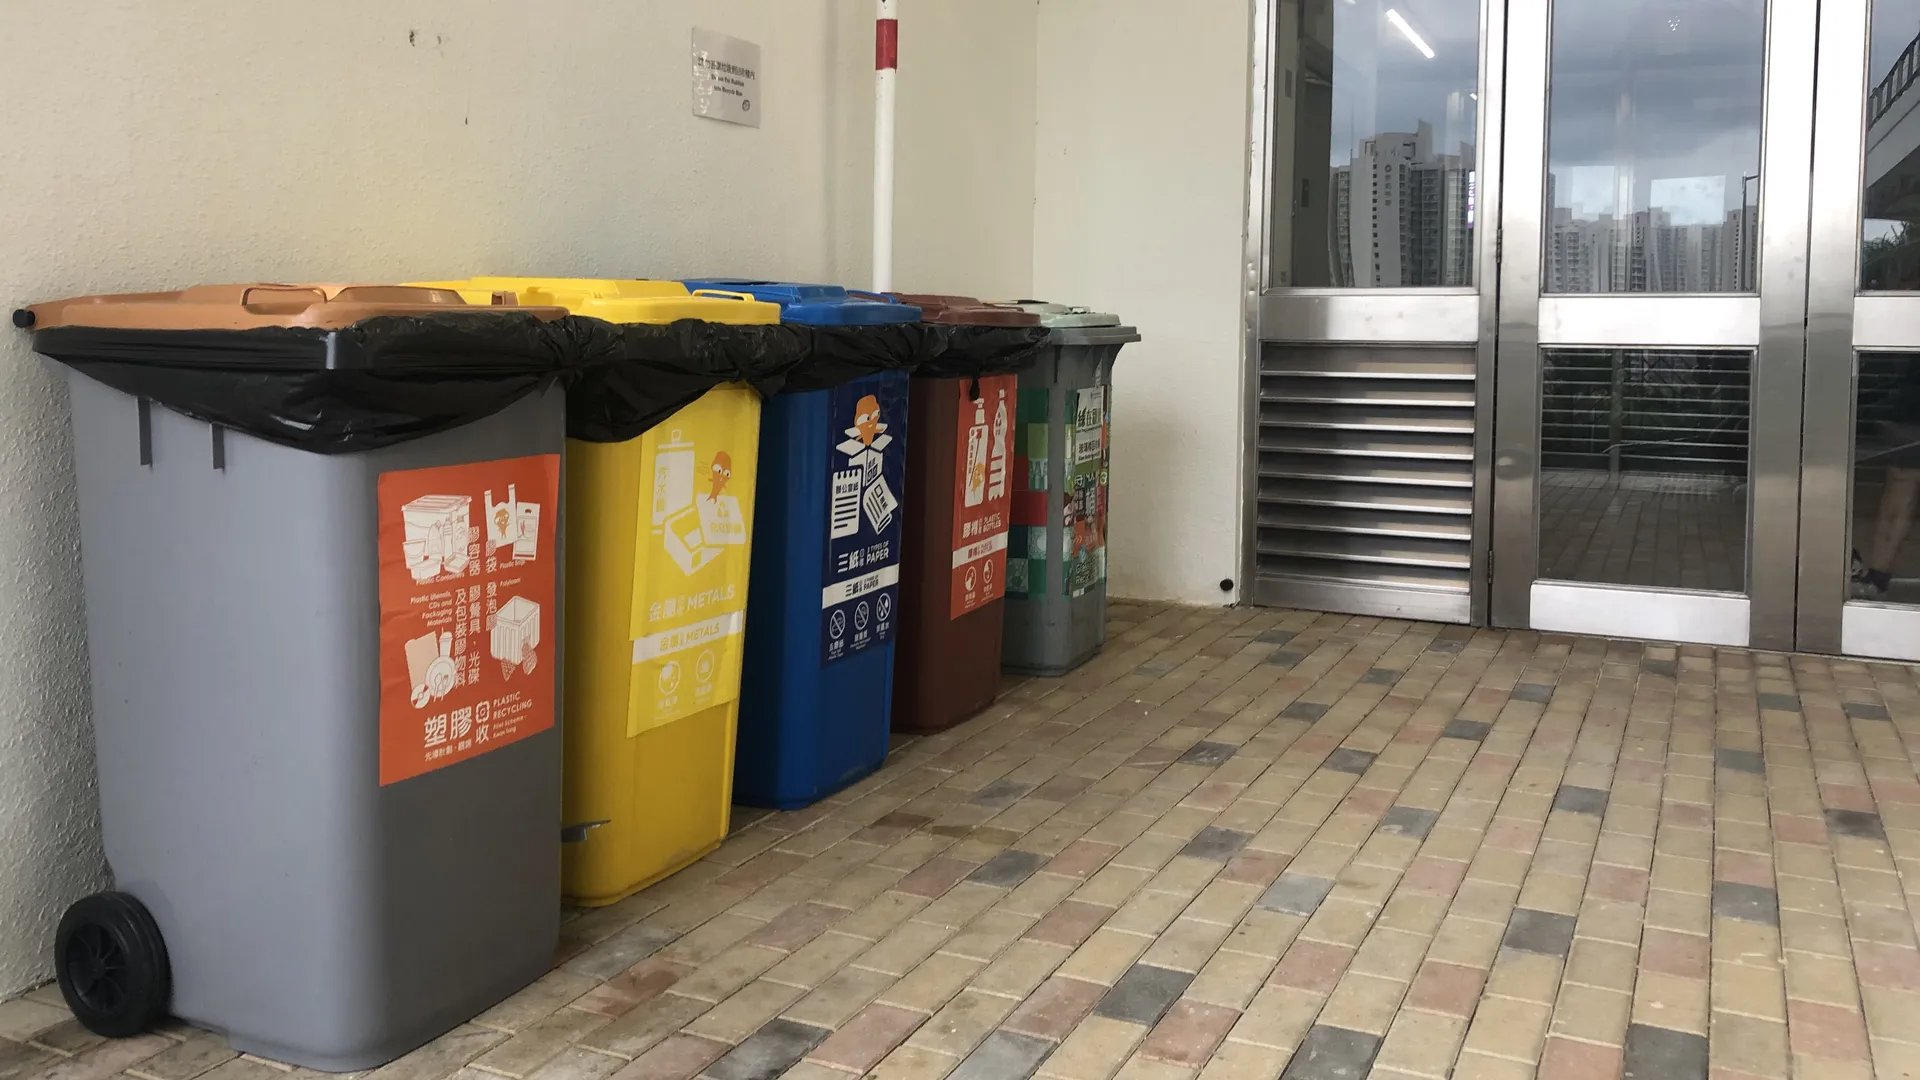 Waste Separation Bins at residential building